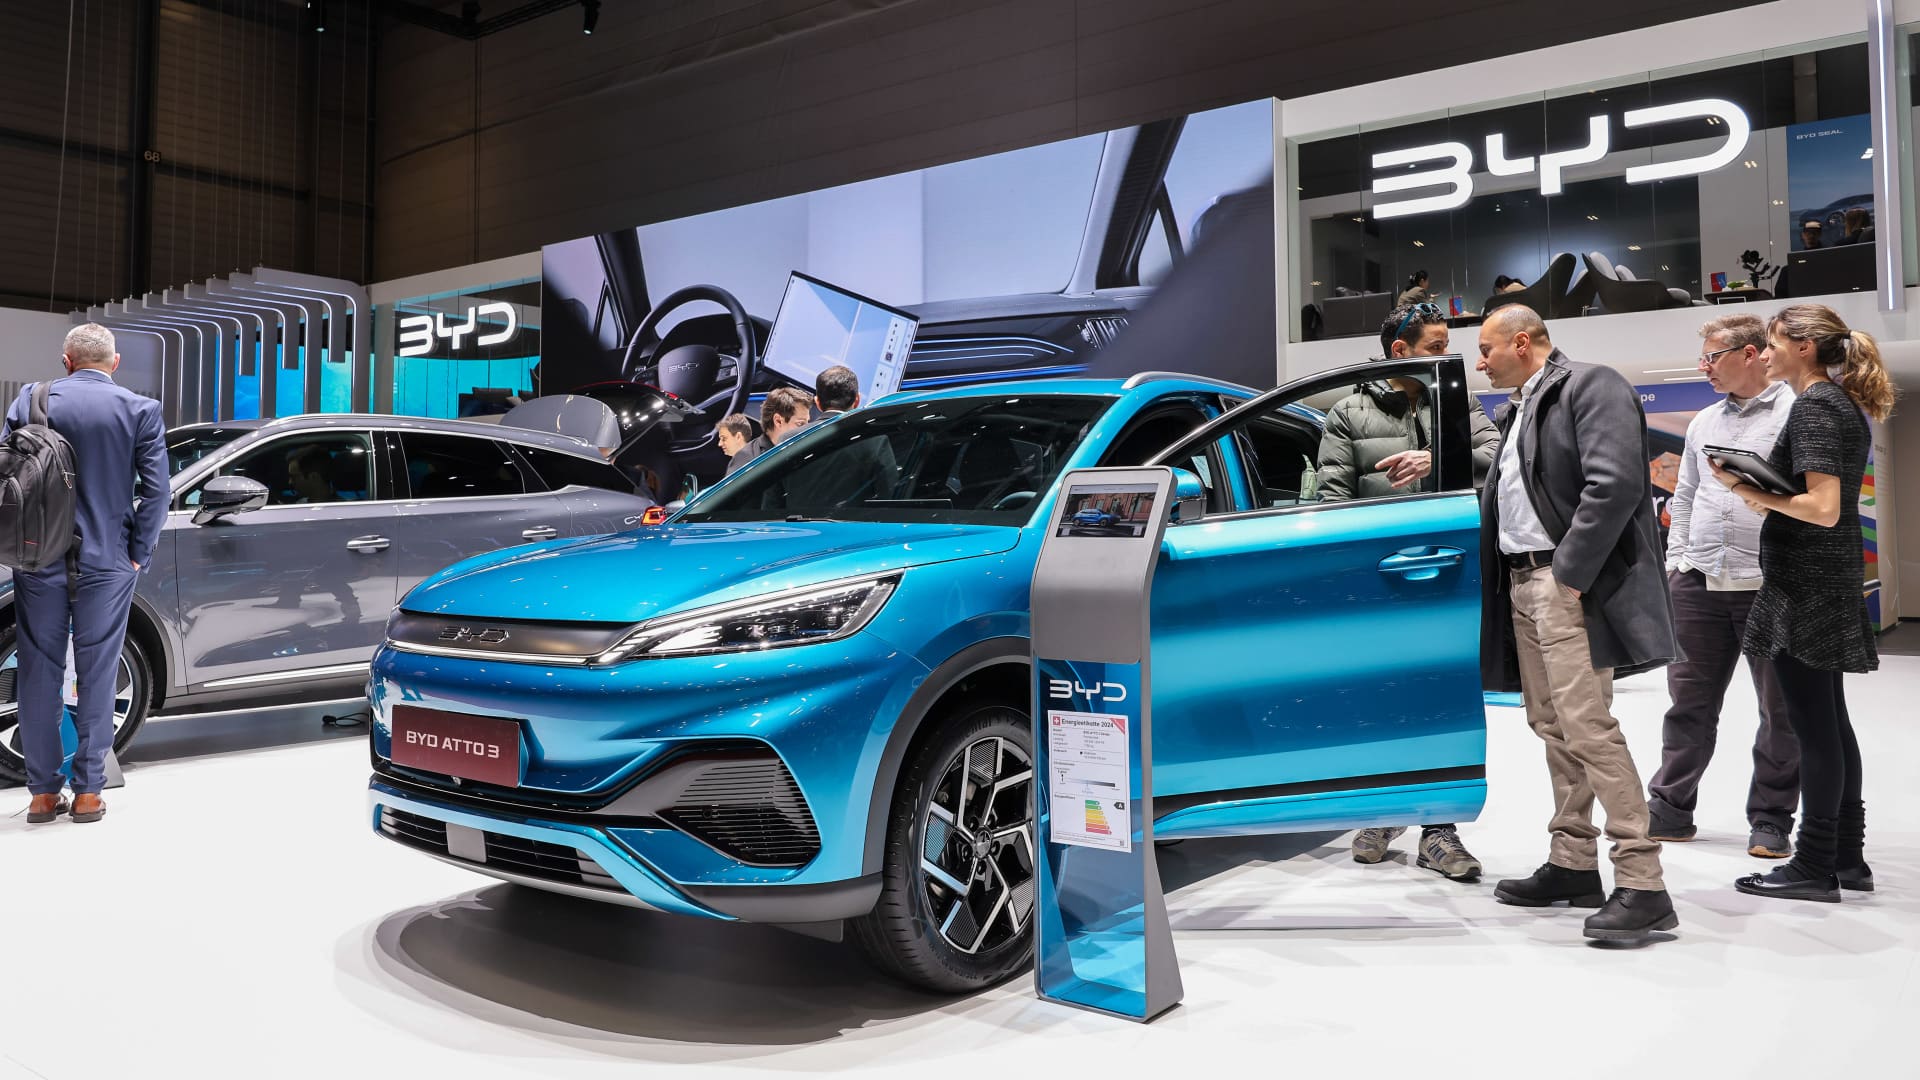 China-made vehicles will comprise a quarter of Europe’s EV sales this year, study shows